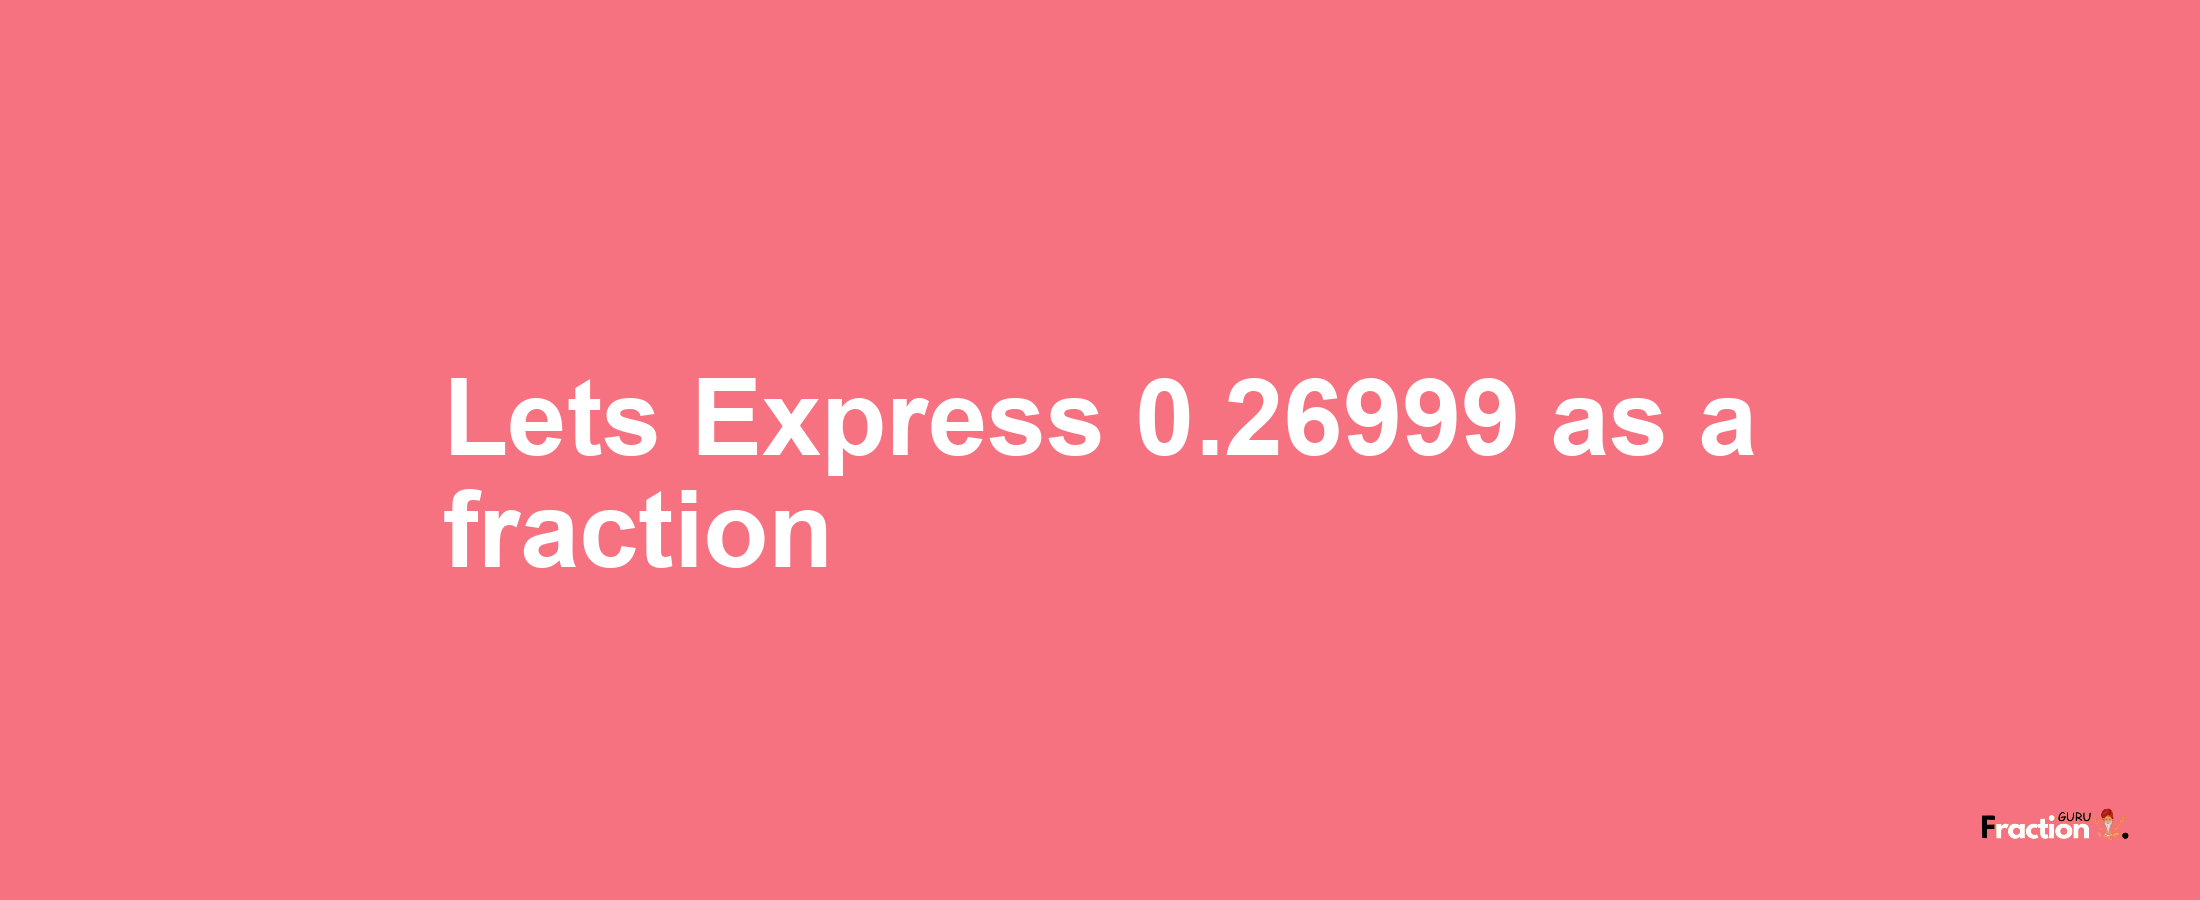 Lets Express 0.26999 as afraction